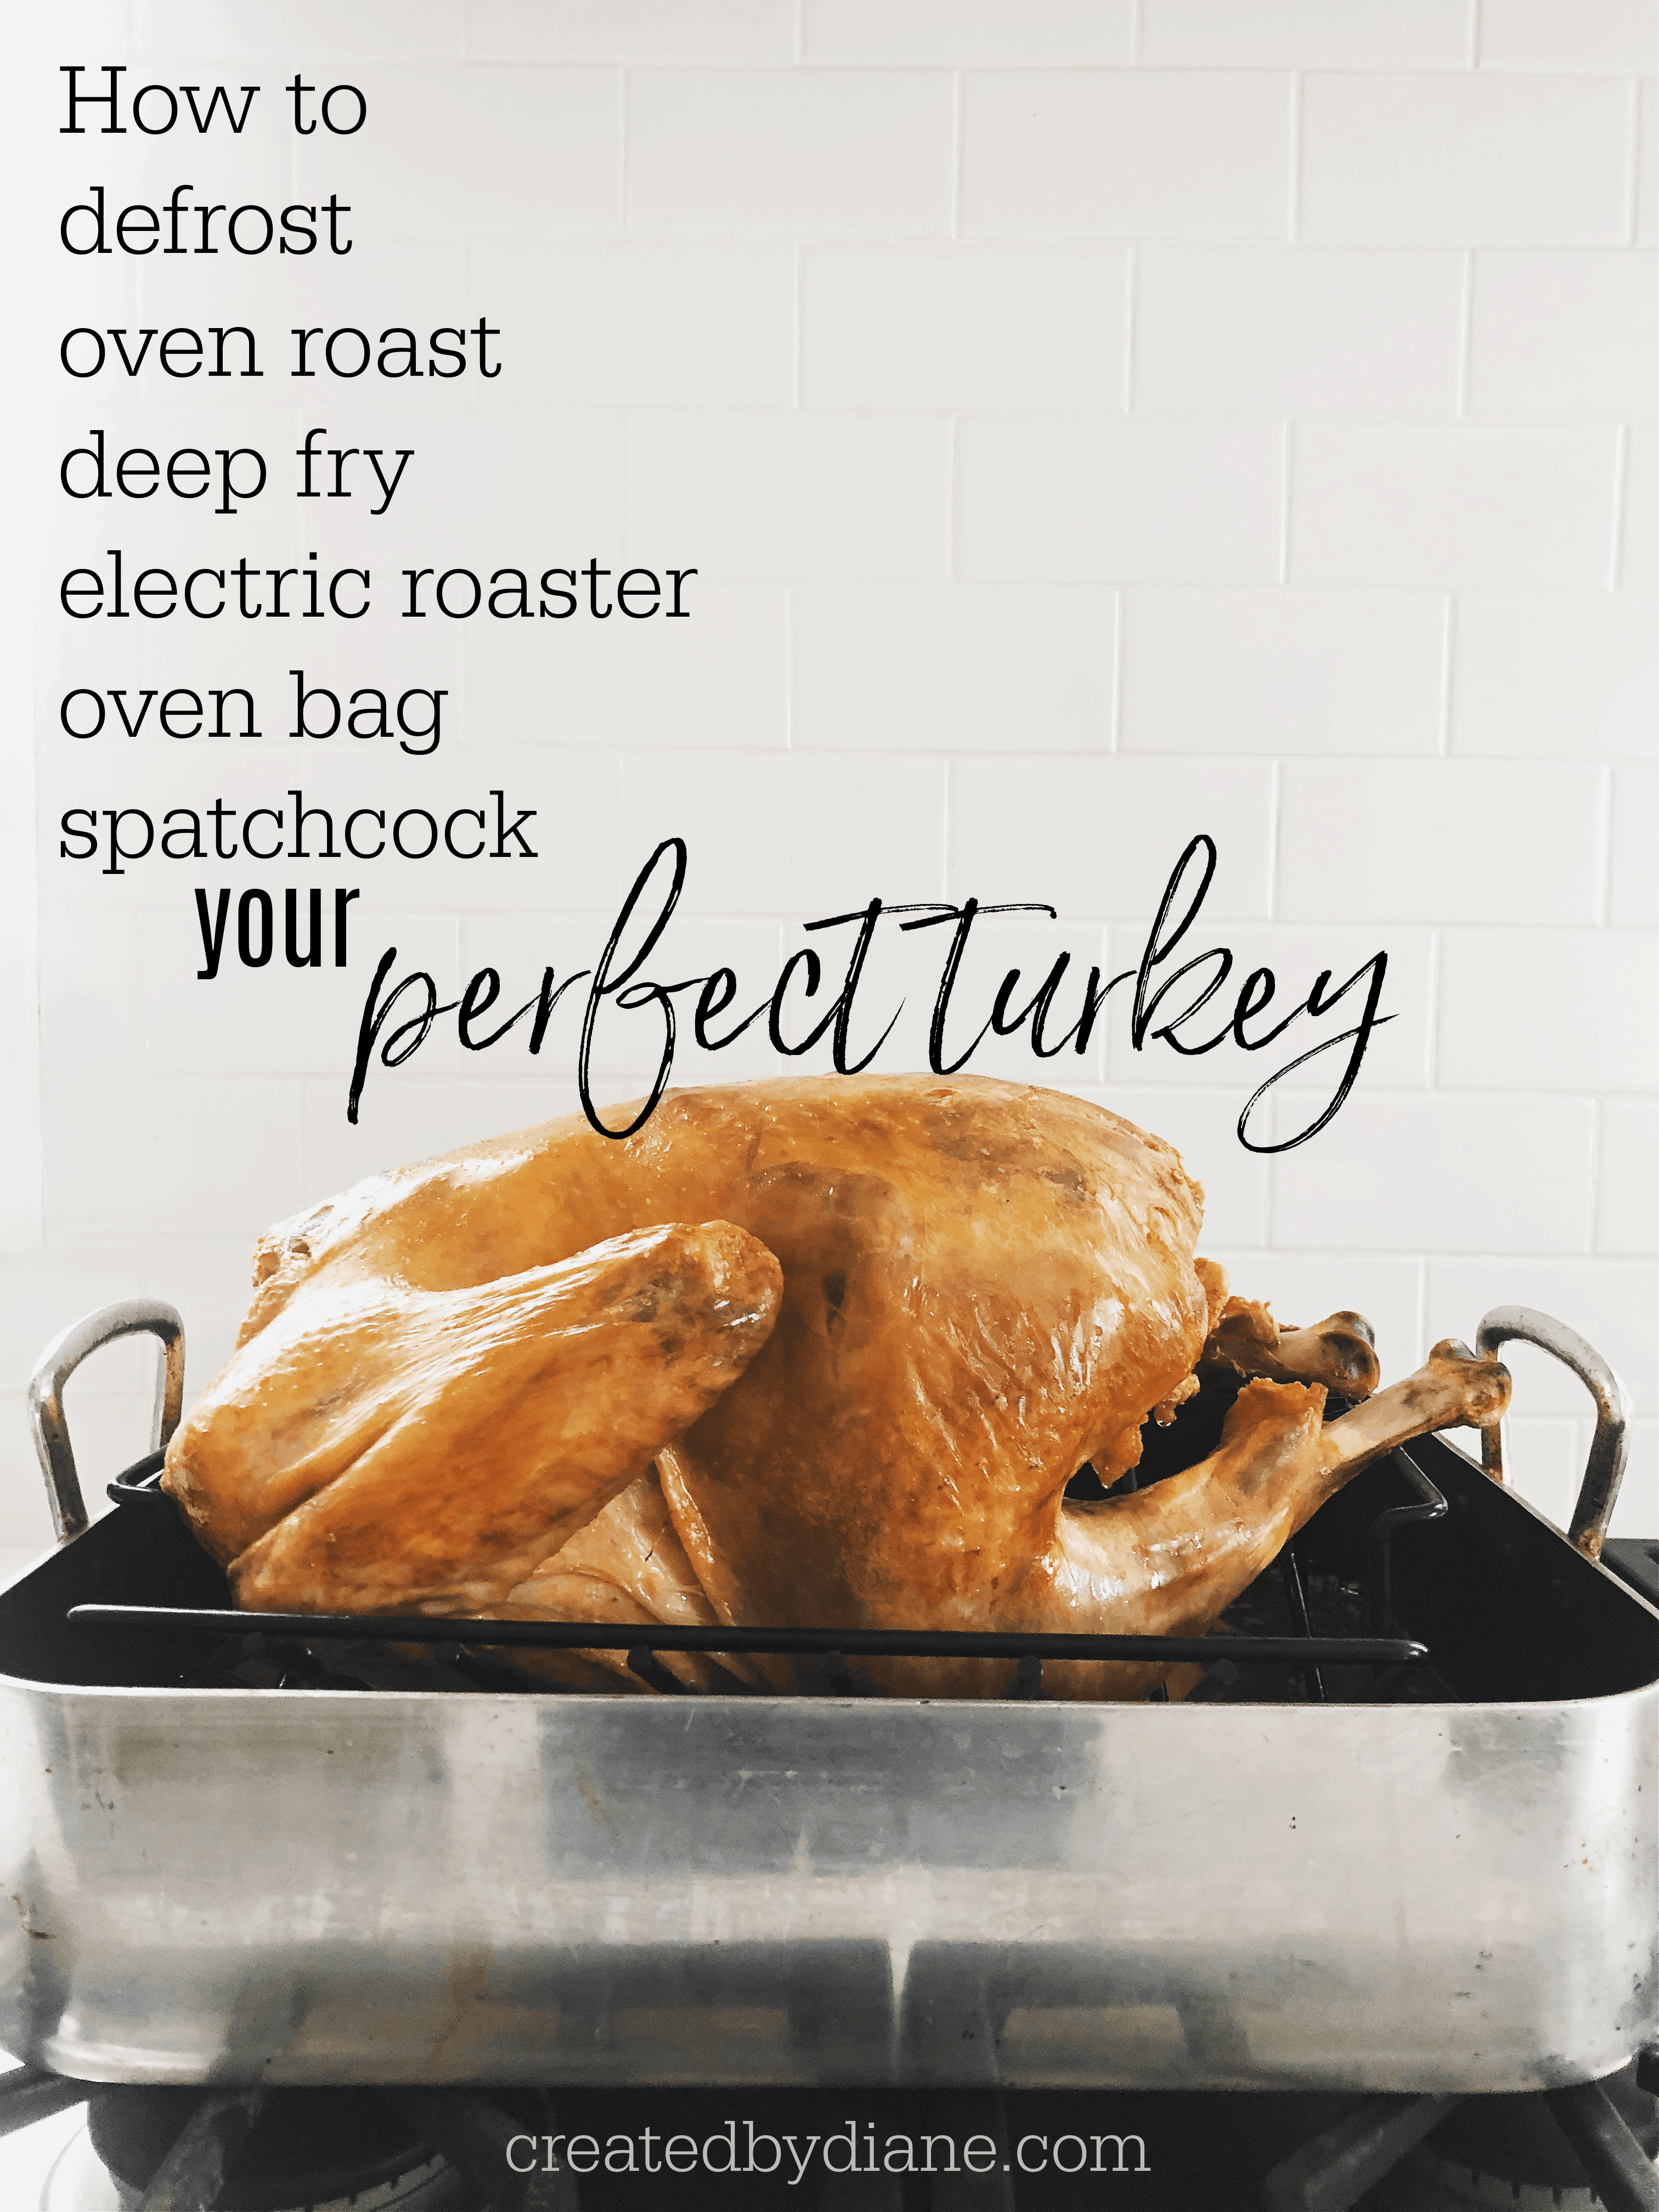 https://www.createdby-diane.com/wp-content/uploads/2020/11/how-to-defrost-roast-fry-oven-bag-spatchcock-your-perfect-turkey-createdbydiane.com_.png